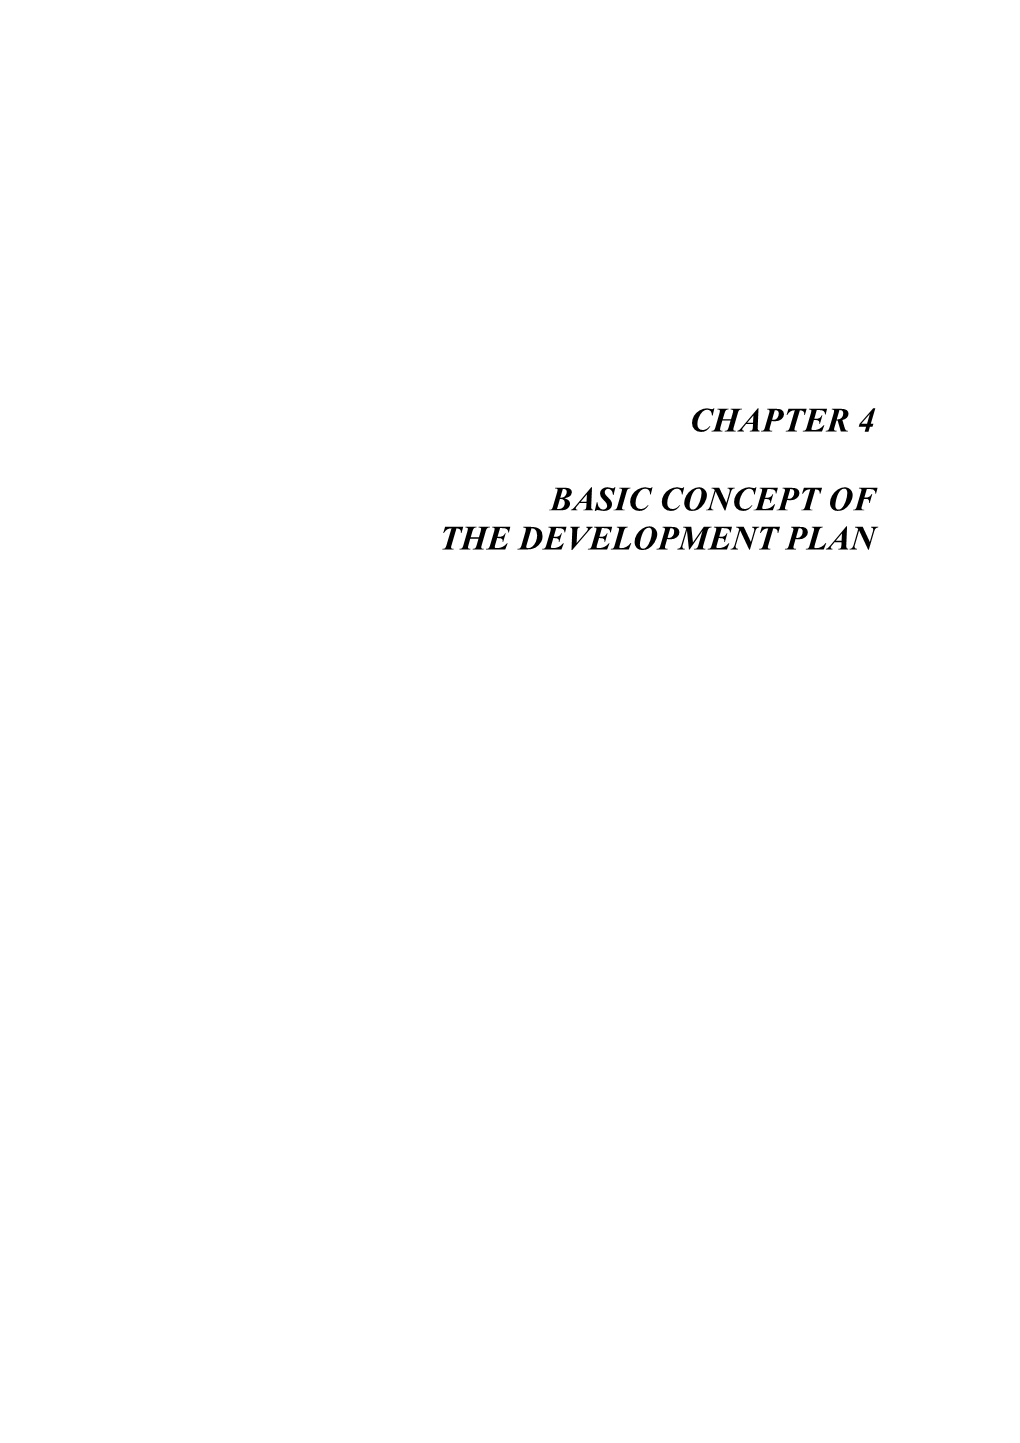 Chapter 4 Basic Concept of the Development Plan